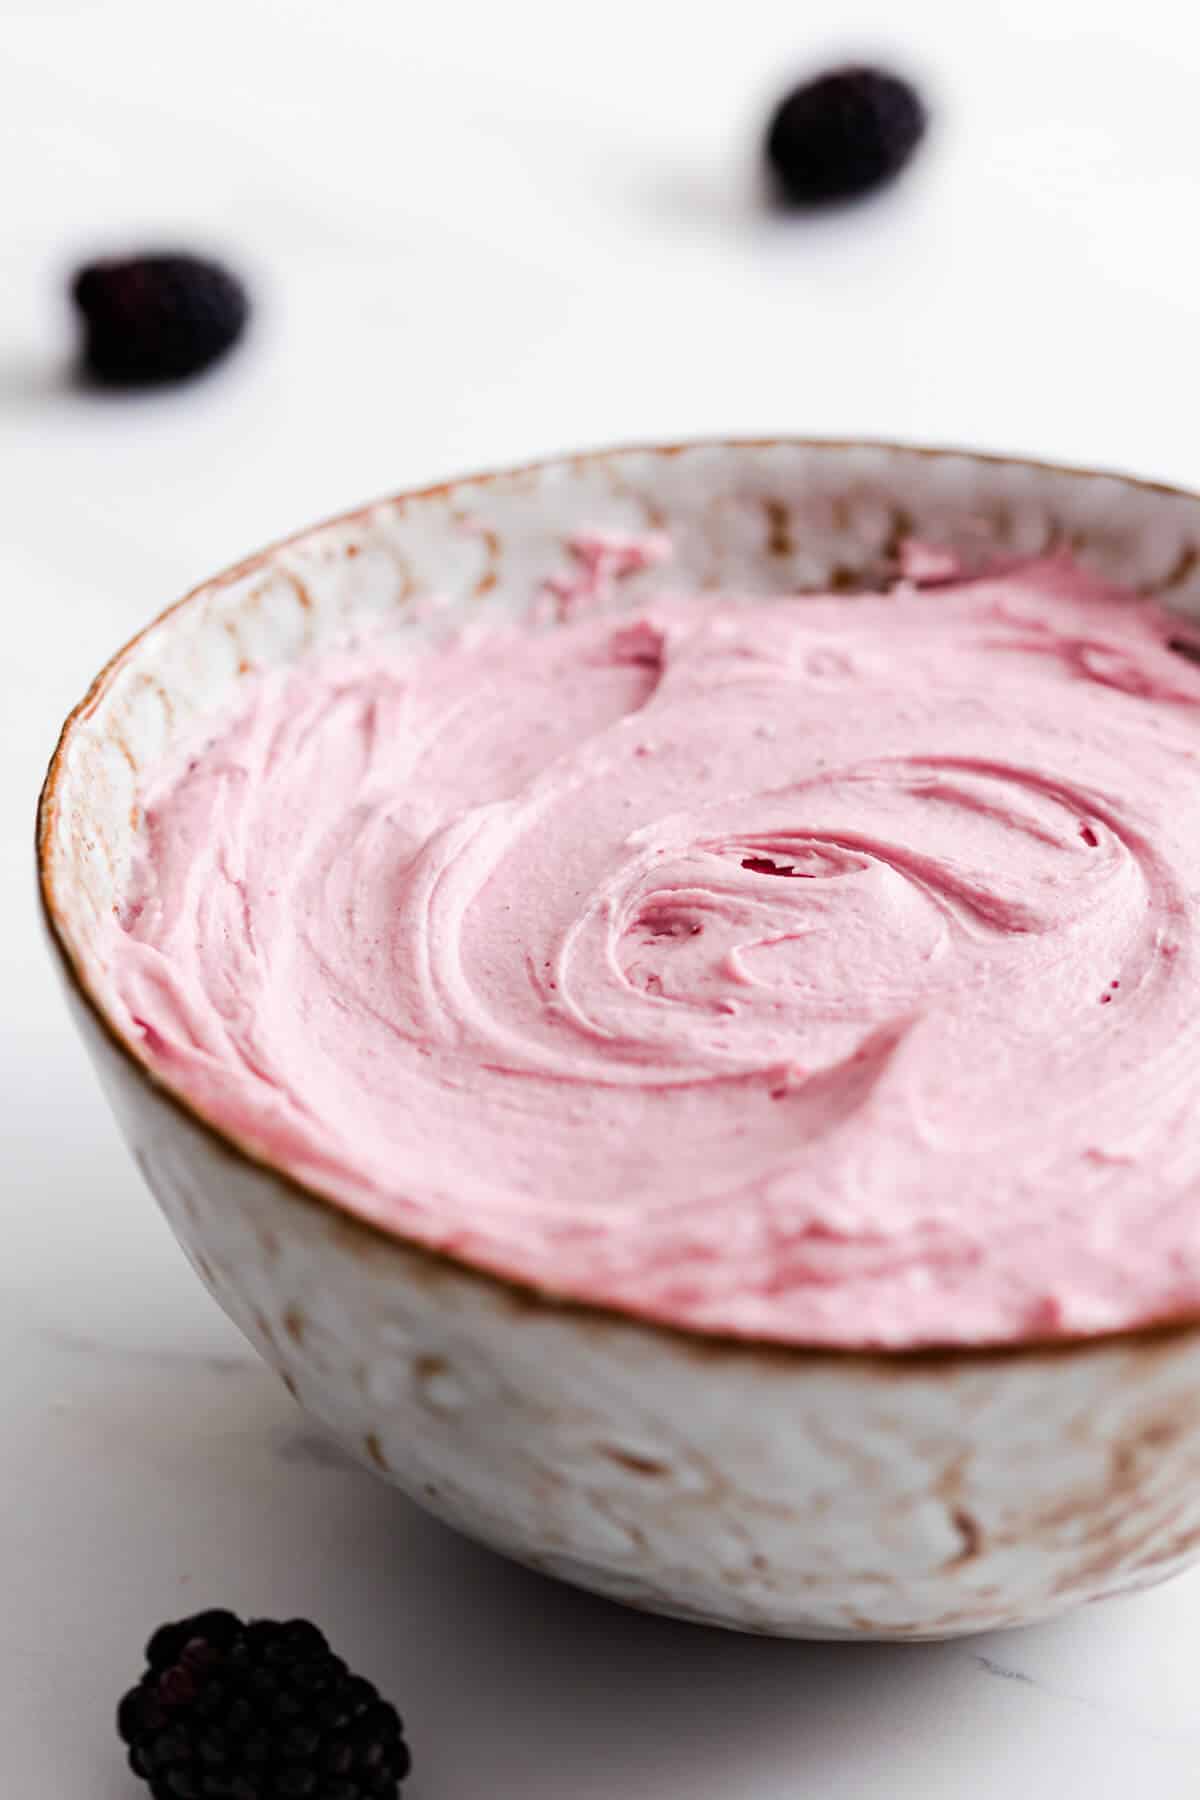 side super close up of a bowl with blackberry buttercream